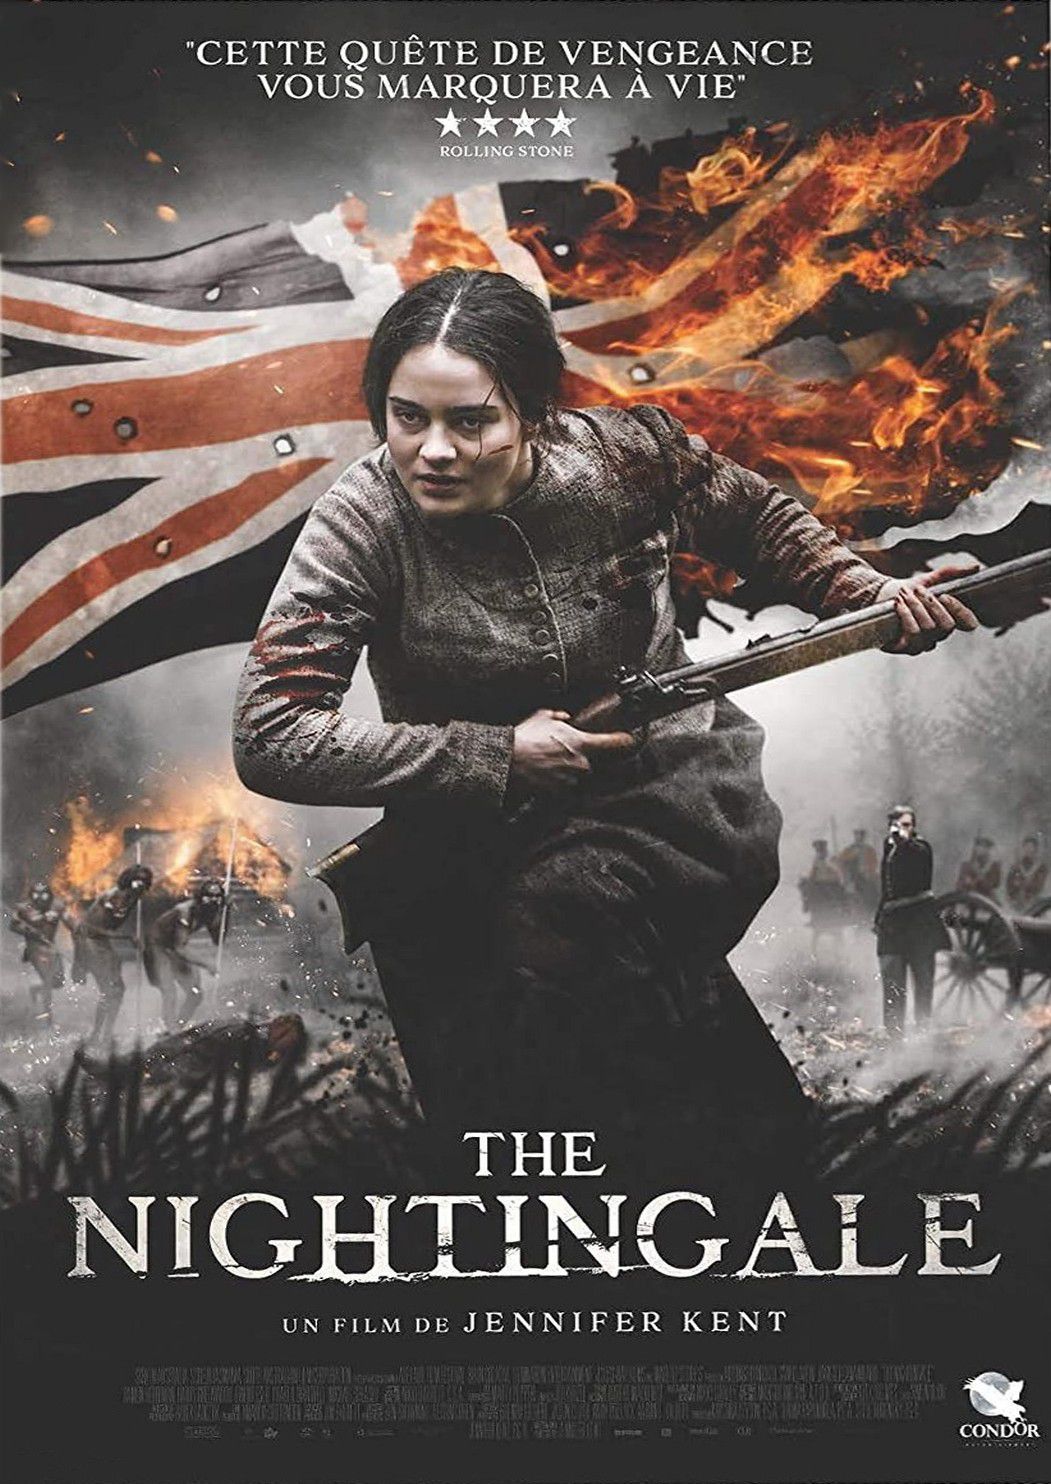 The Nightingale - Film (2019) streaming VF gratuit complet